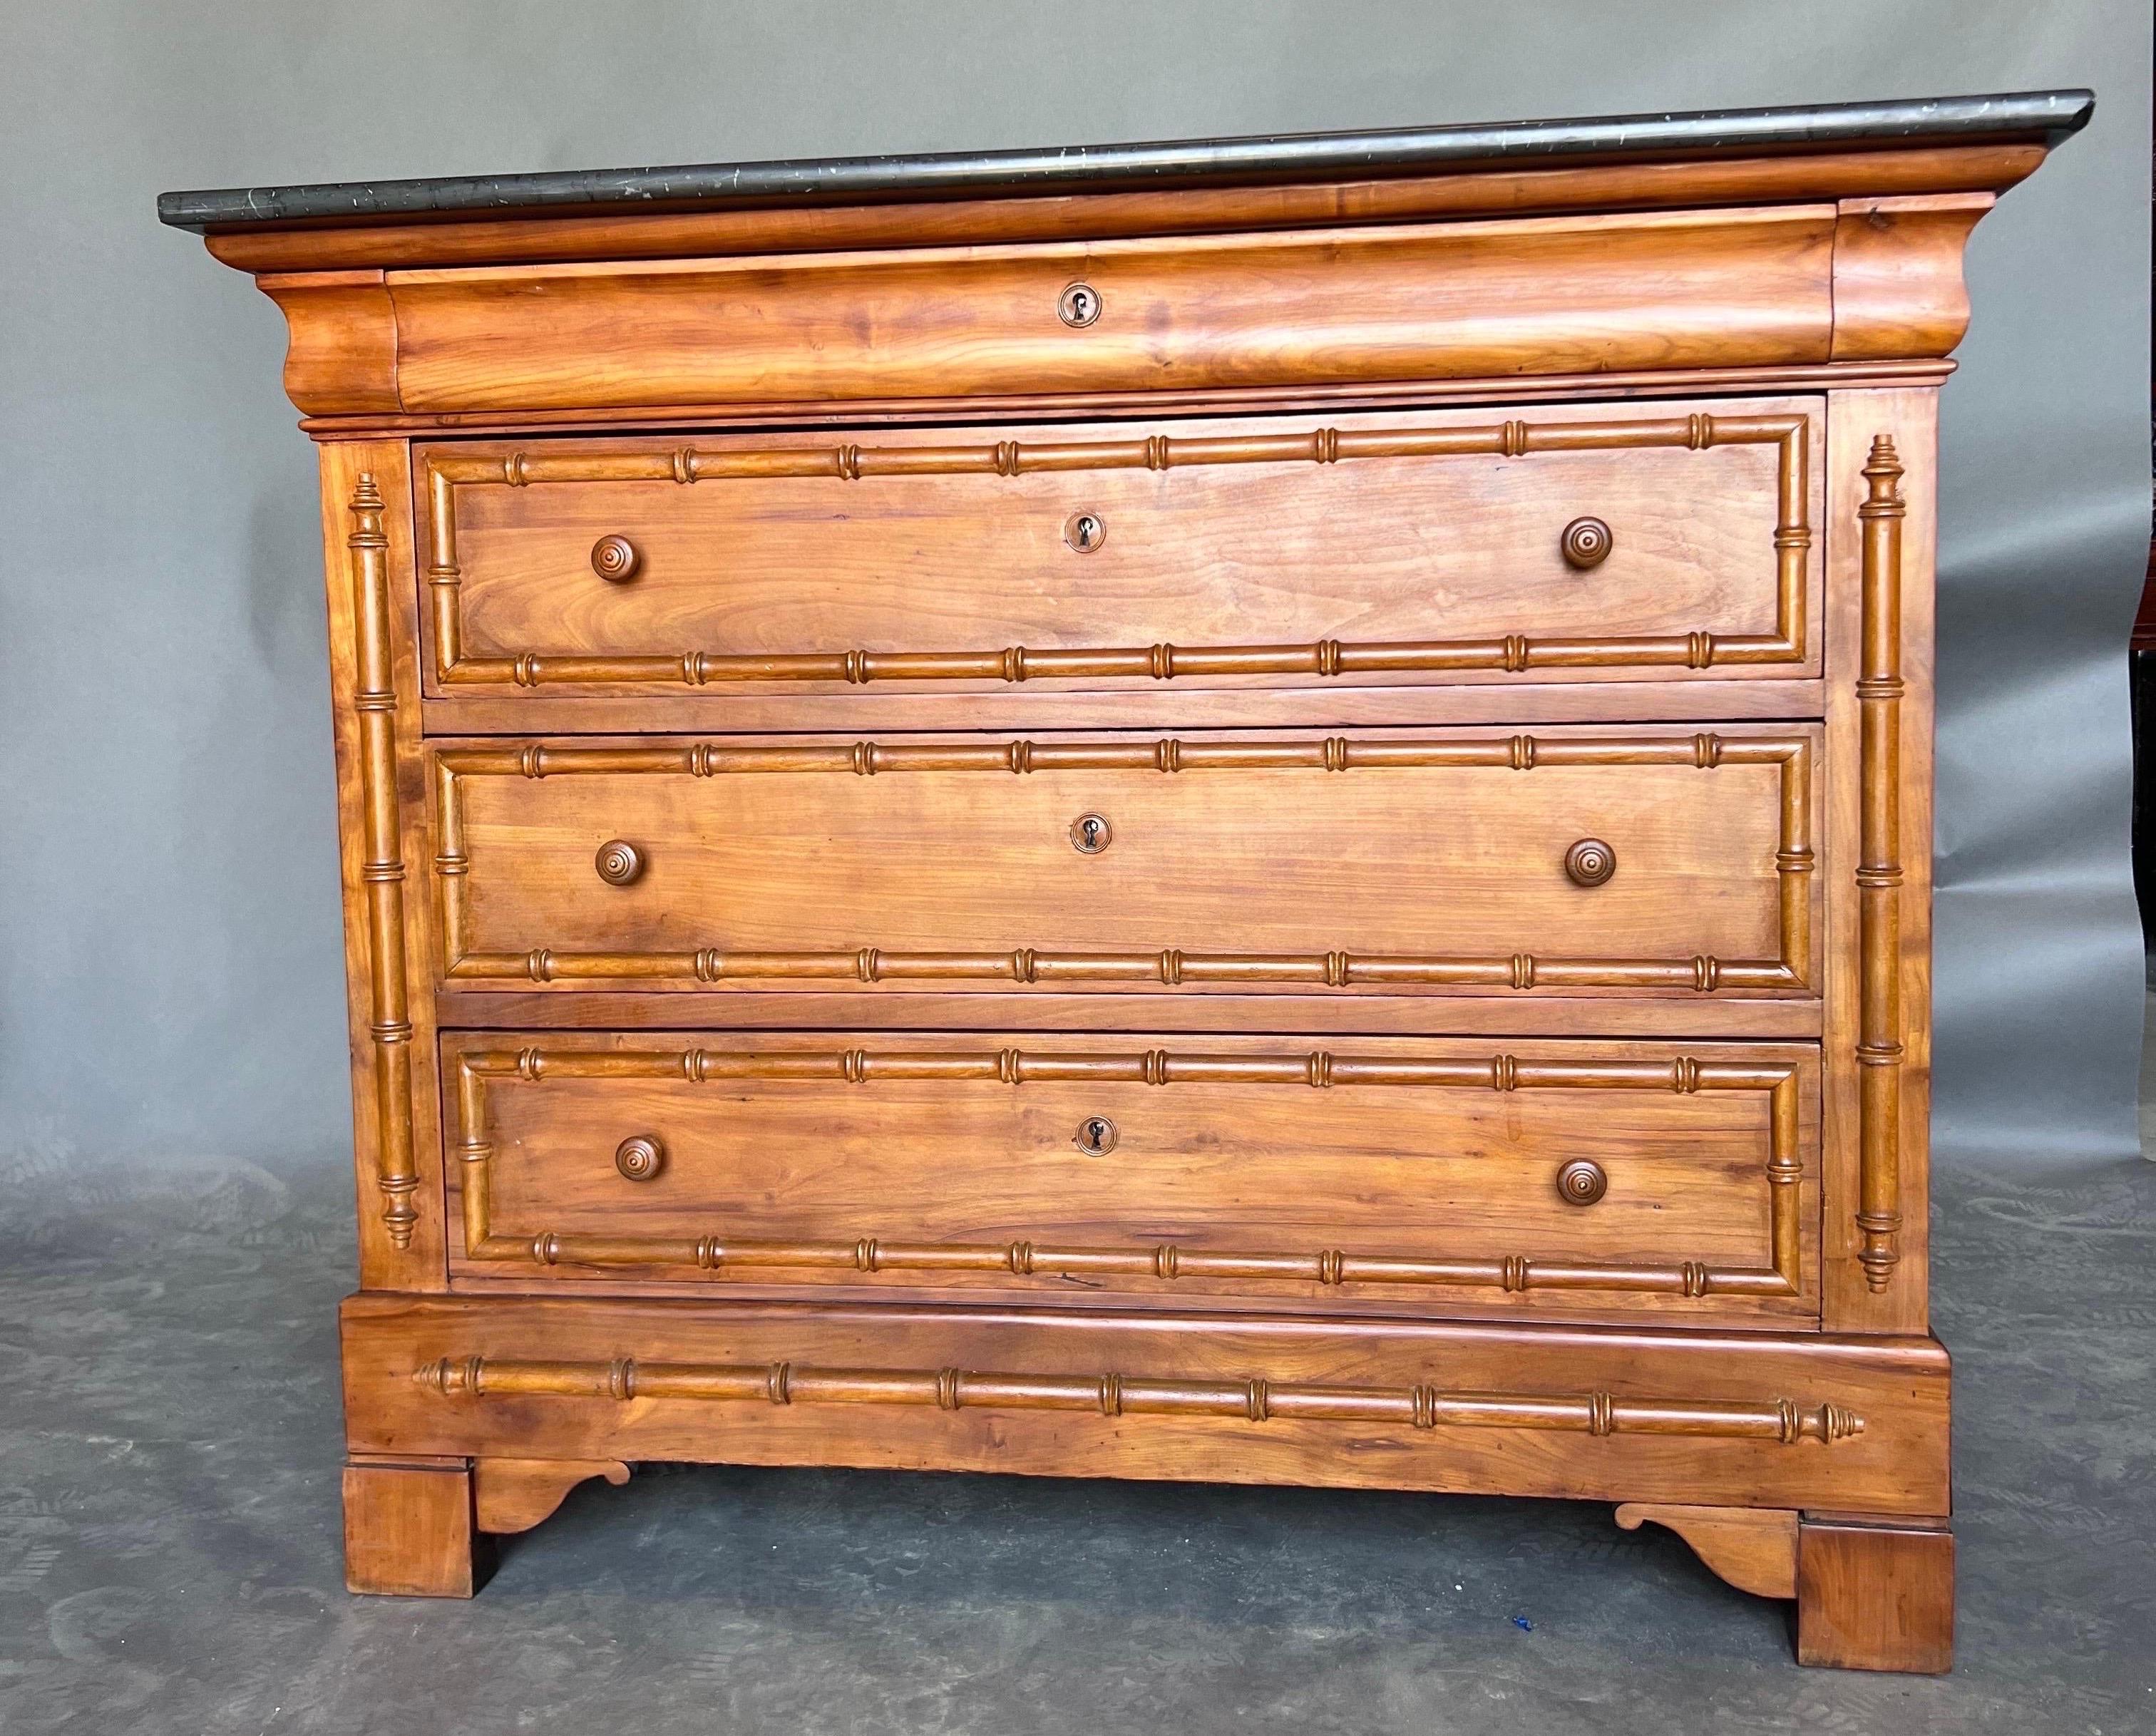 Gorgeous full sized 19th century French faux bamboo 4 drawer chest with original black marble top. 

Complimentary shipping to-
Richmond, Va
Charleston, Sc
Atlanta, Ga
Washington, D.C. 
Nyc, Ny (receiver or curbside)